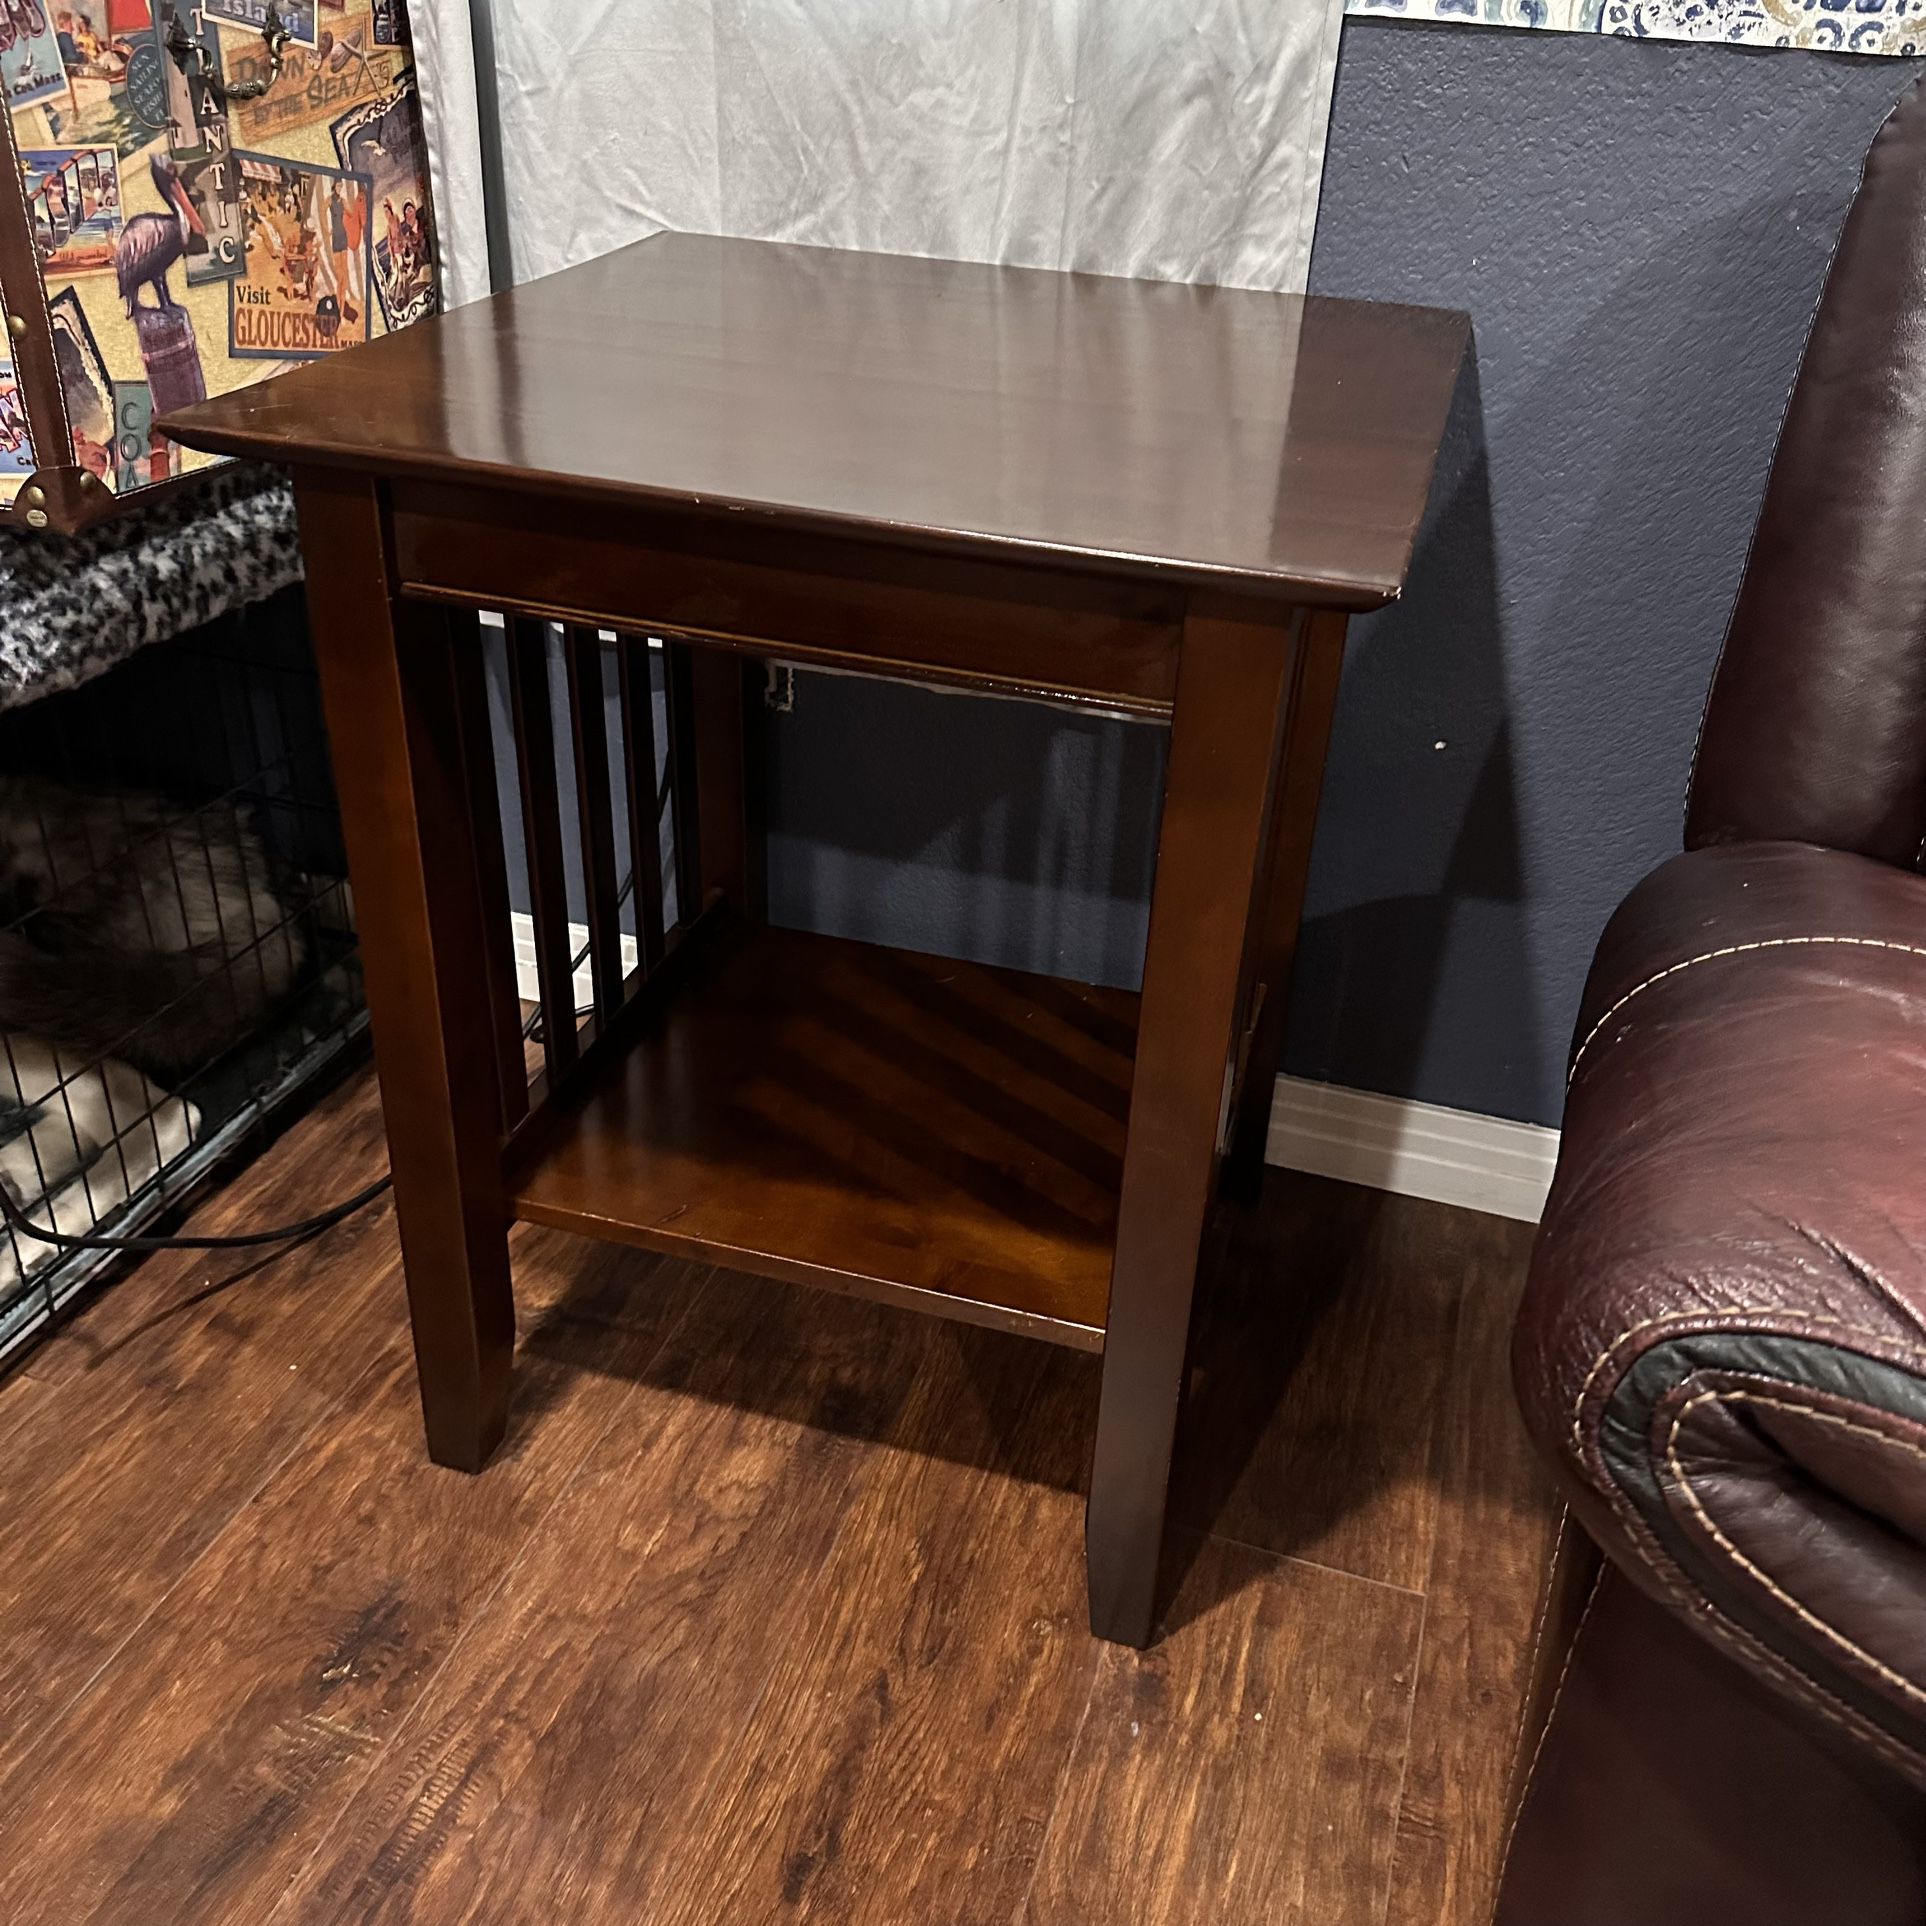 Large Charger End Table in Walnut